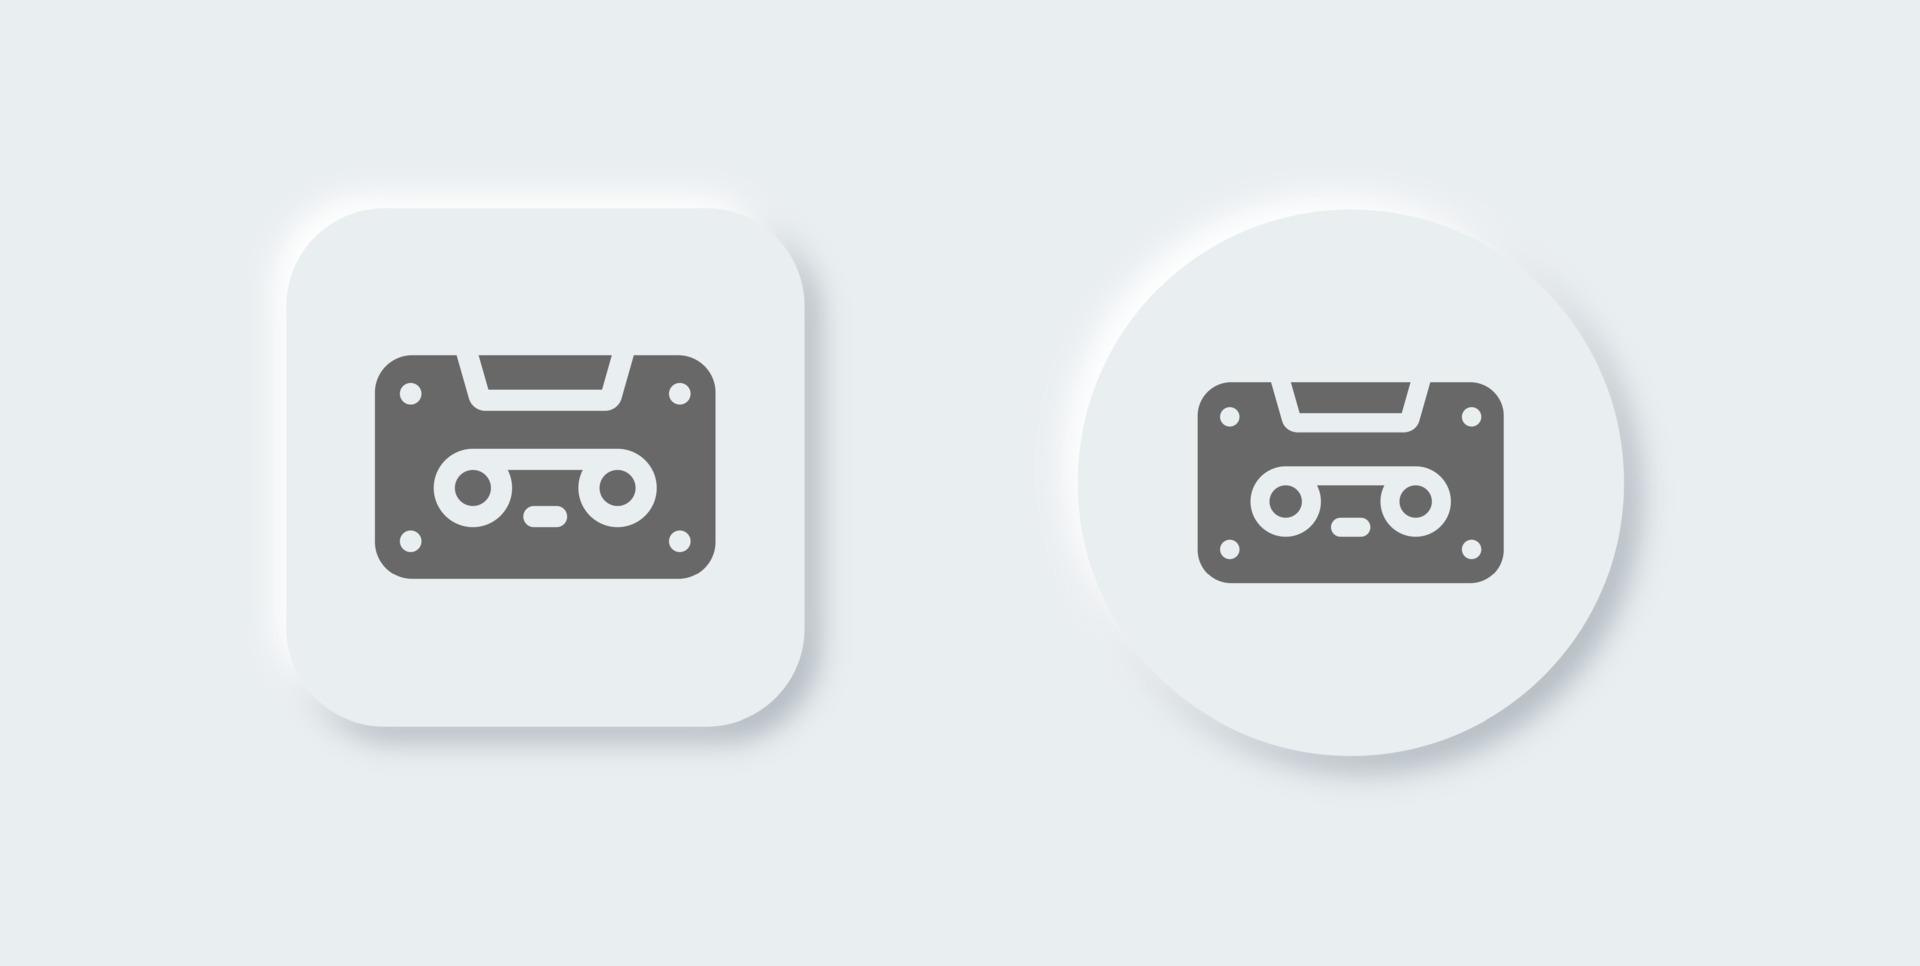 Cassette solid icon in neomorphic design style. Mixtape signs vector illustration.